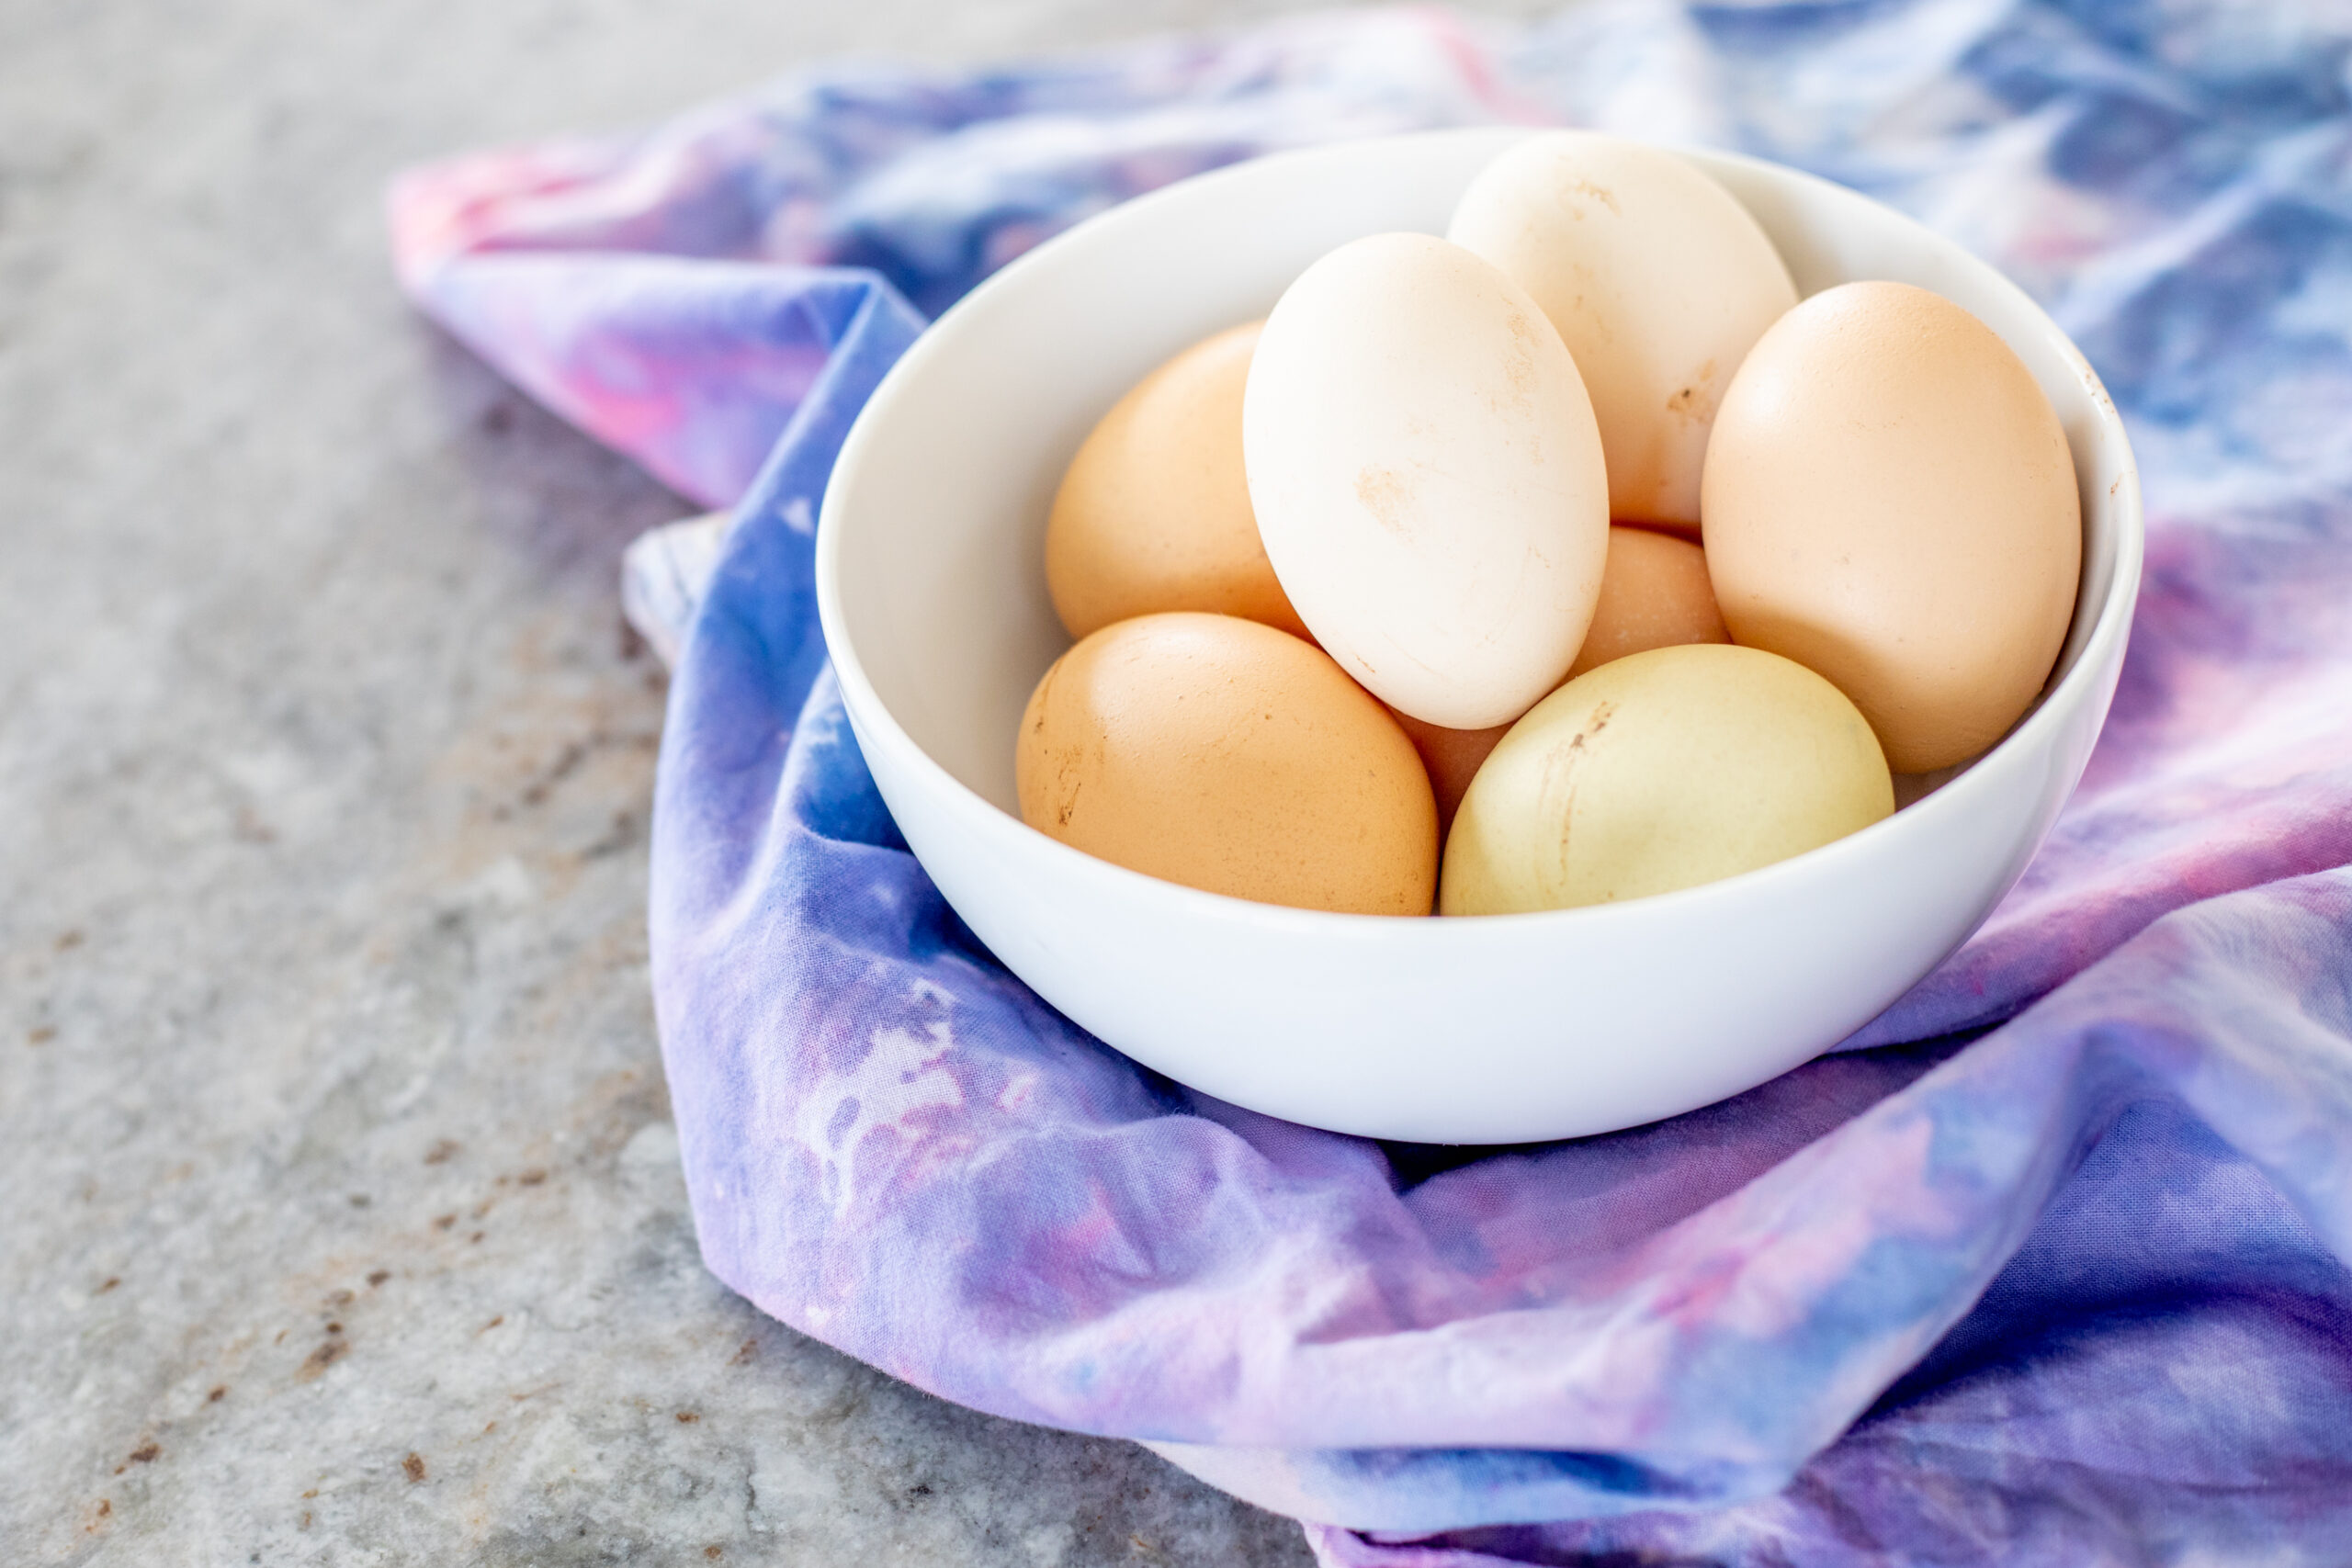 Natural Egg Dyeing with Local Artist Daisy McClellan